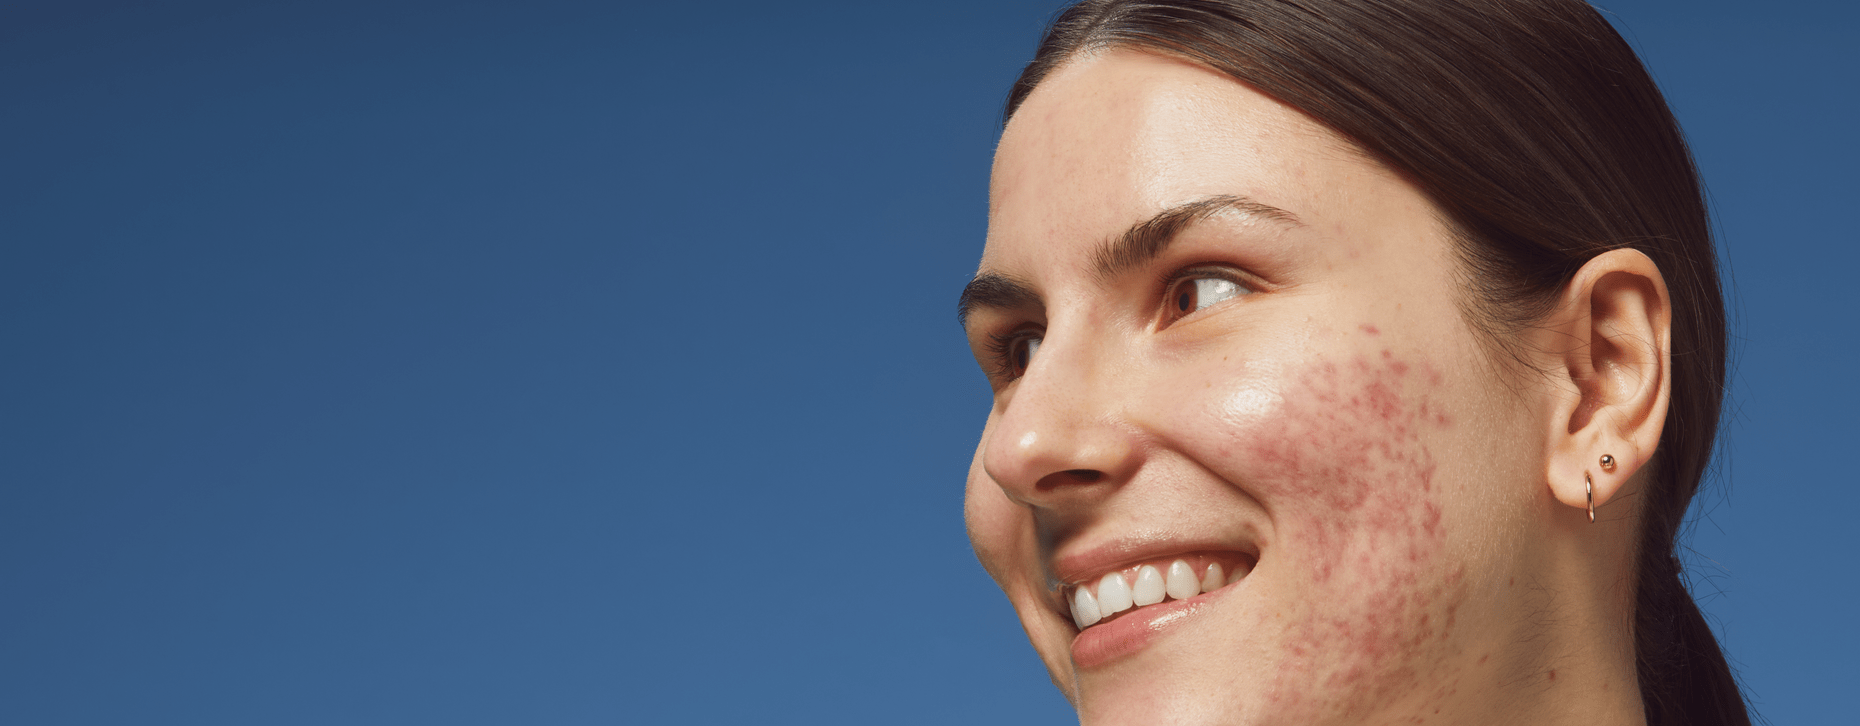 woman with acne smiling